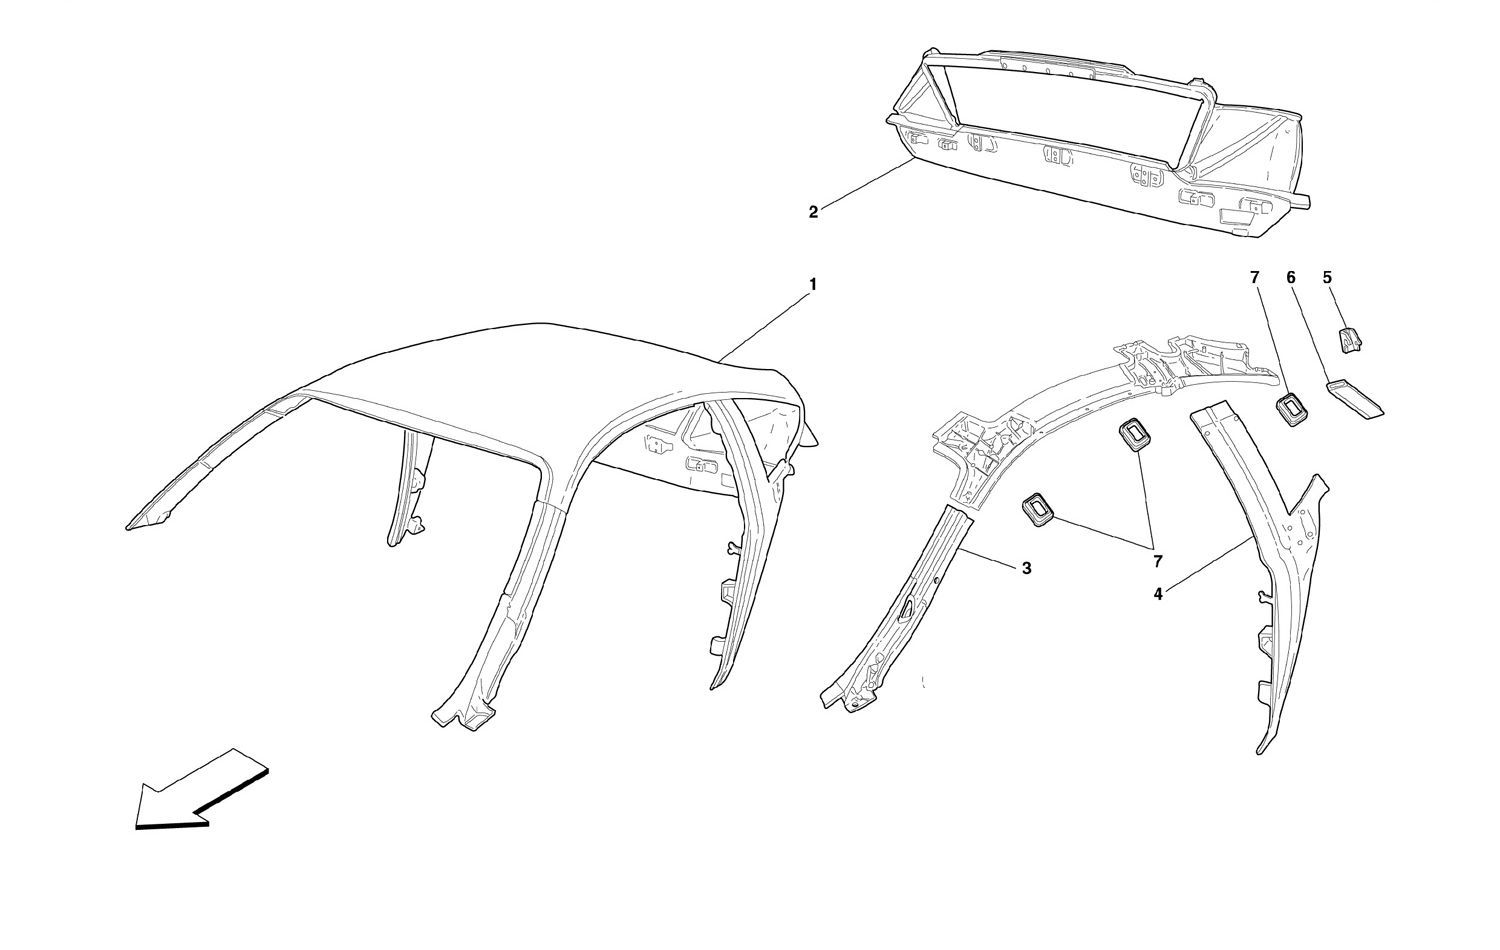 Schematic: Roof - Structure